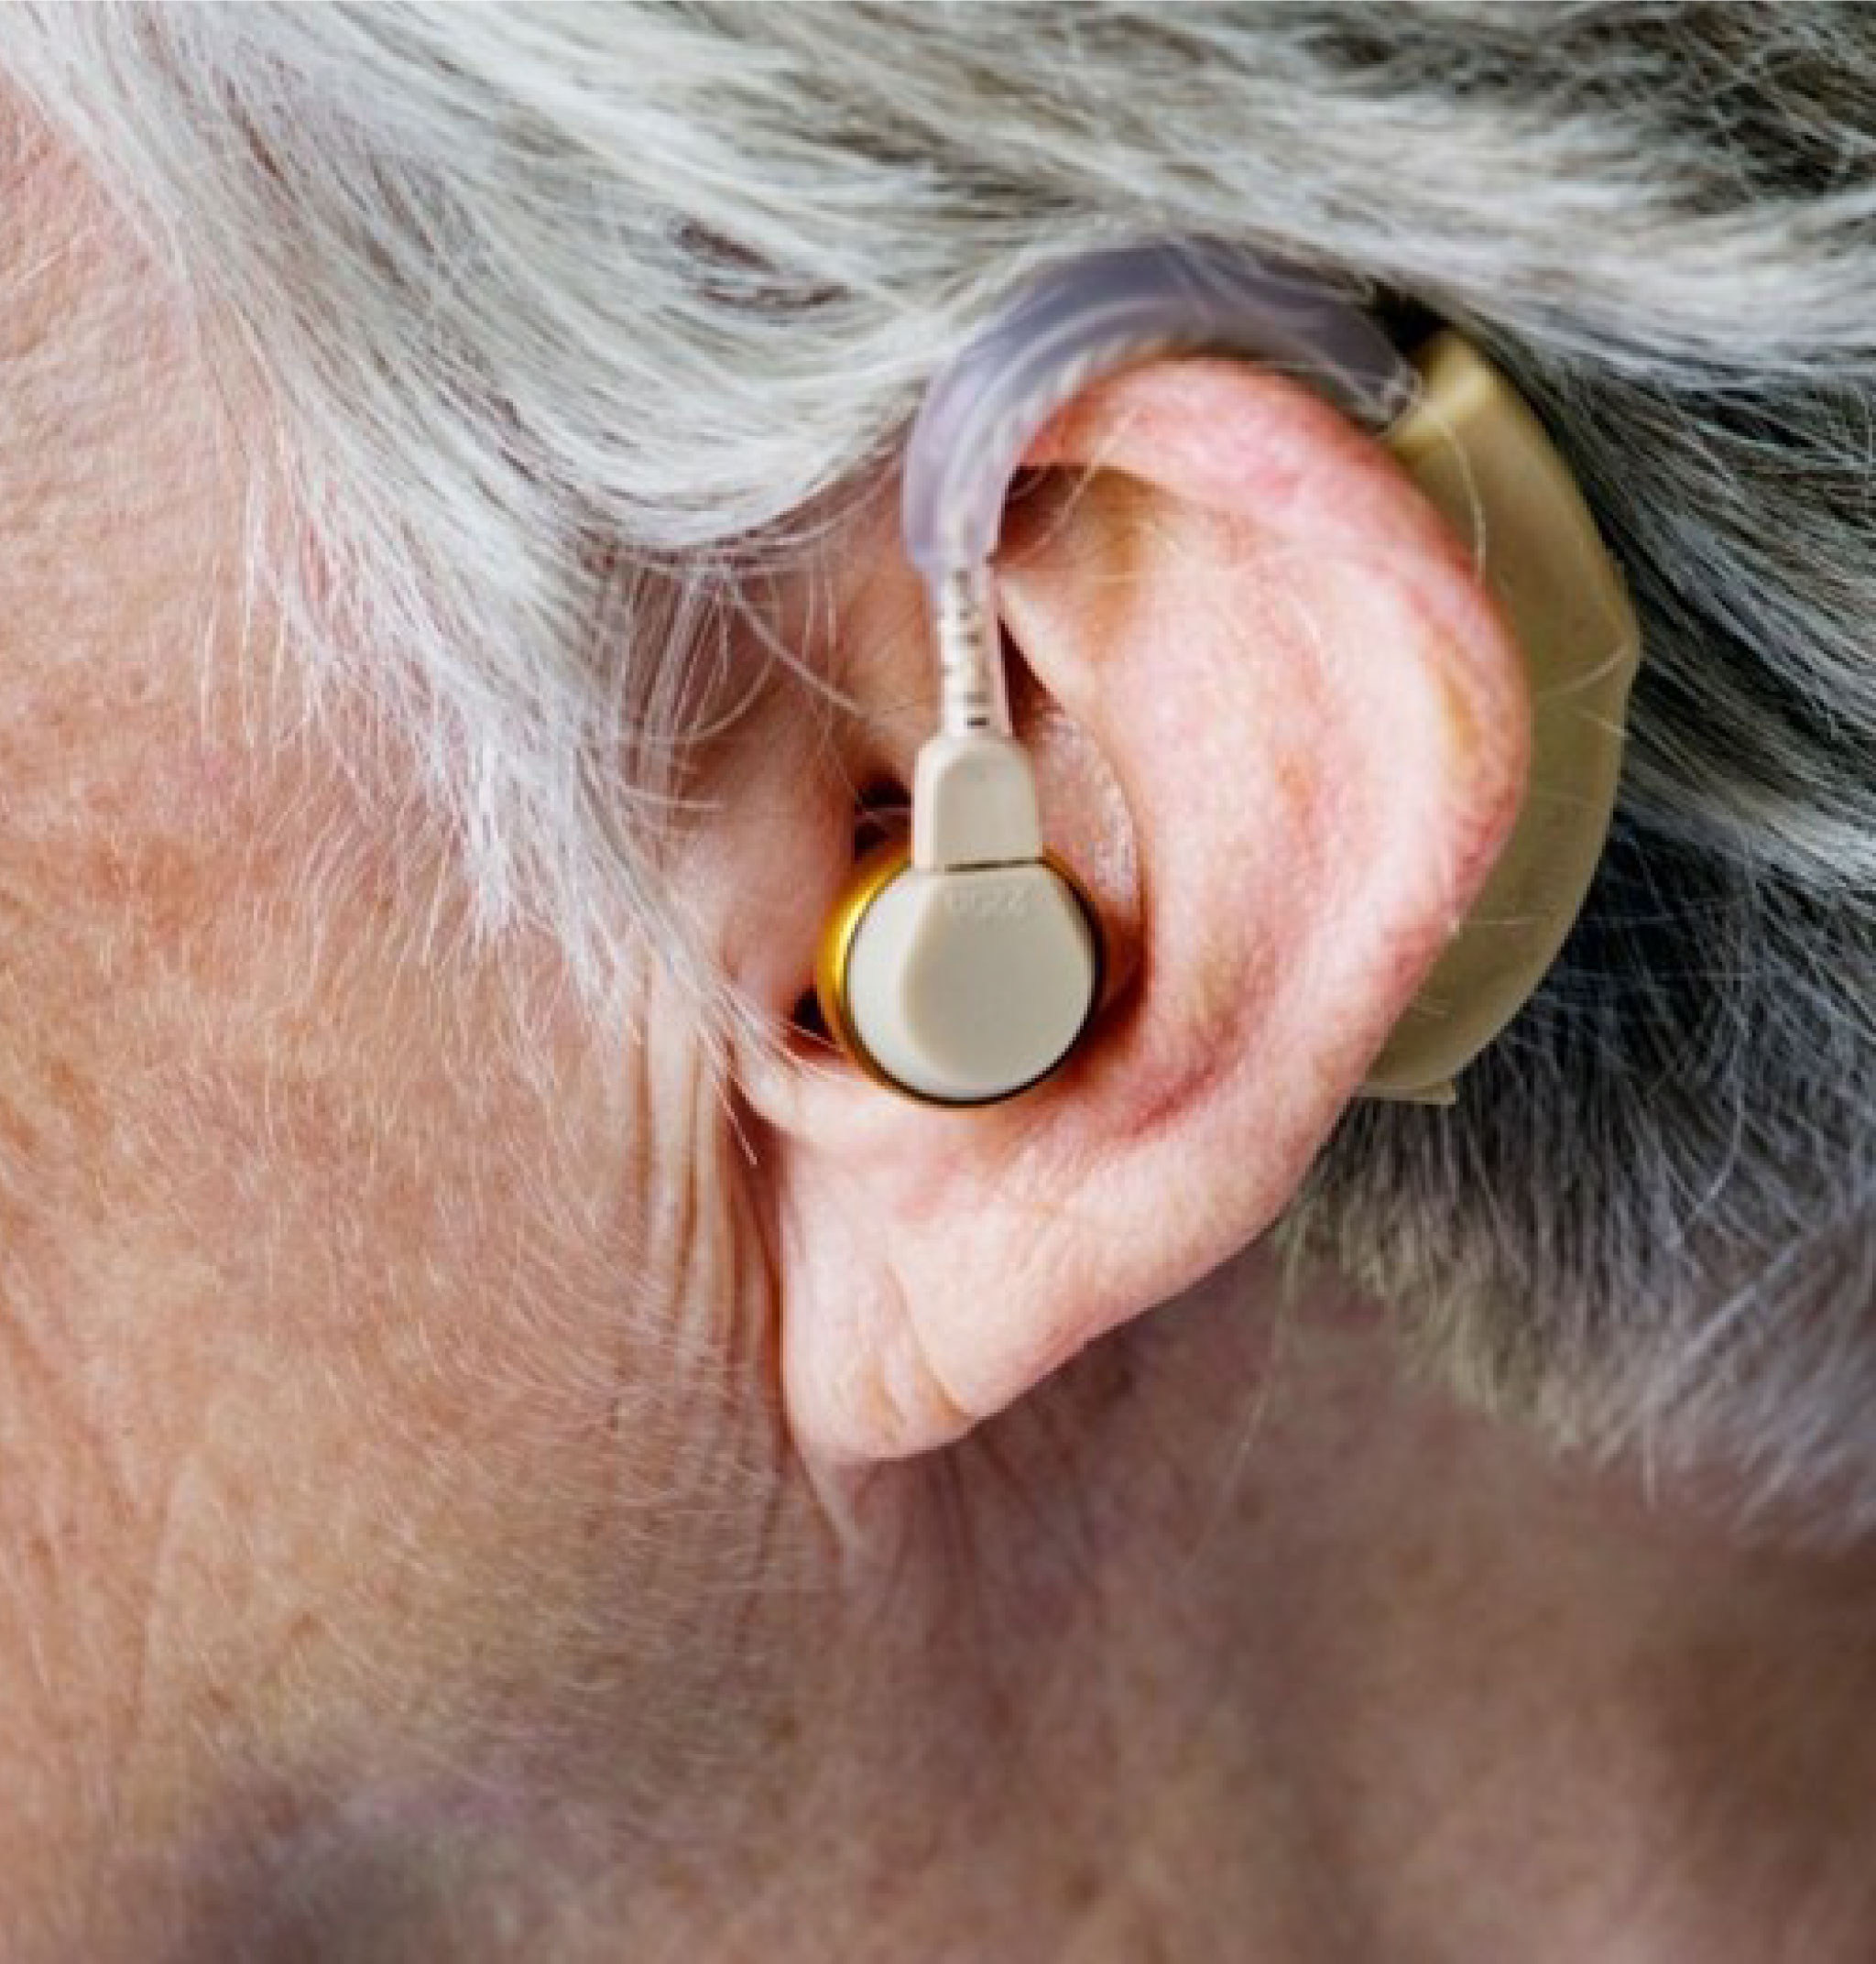 How Technology Can Help Prevent Hearing Loss?